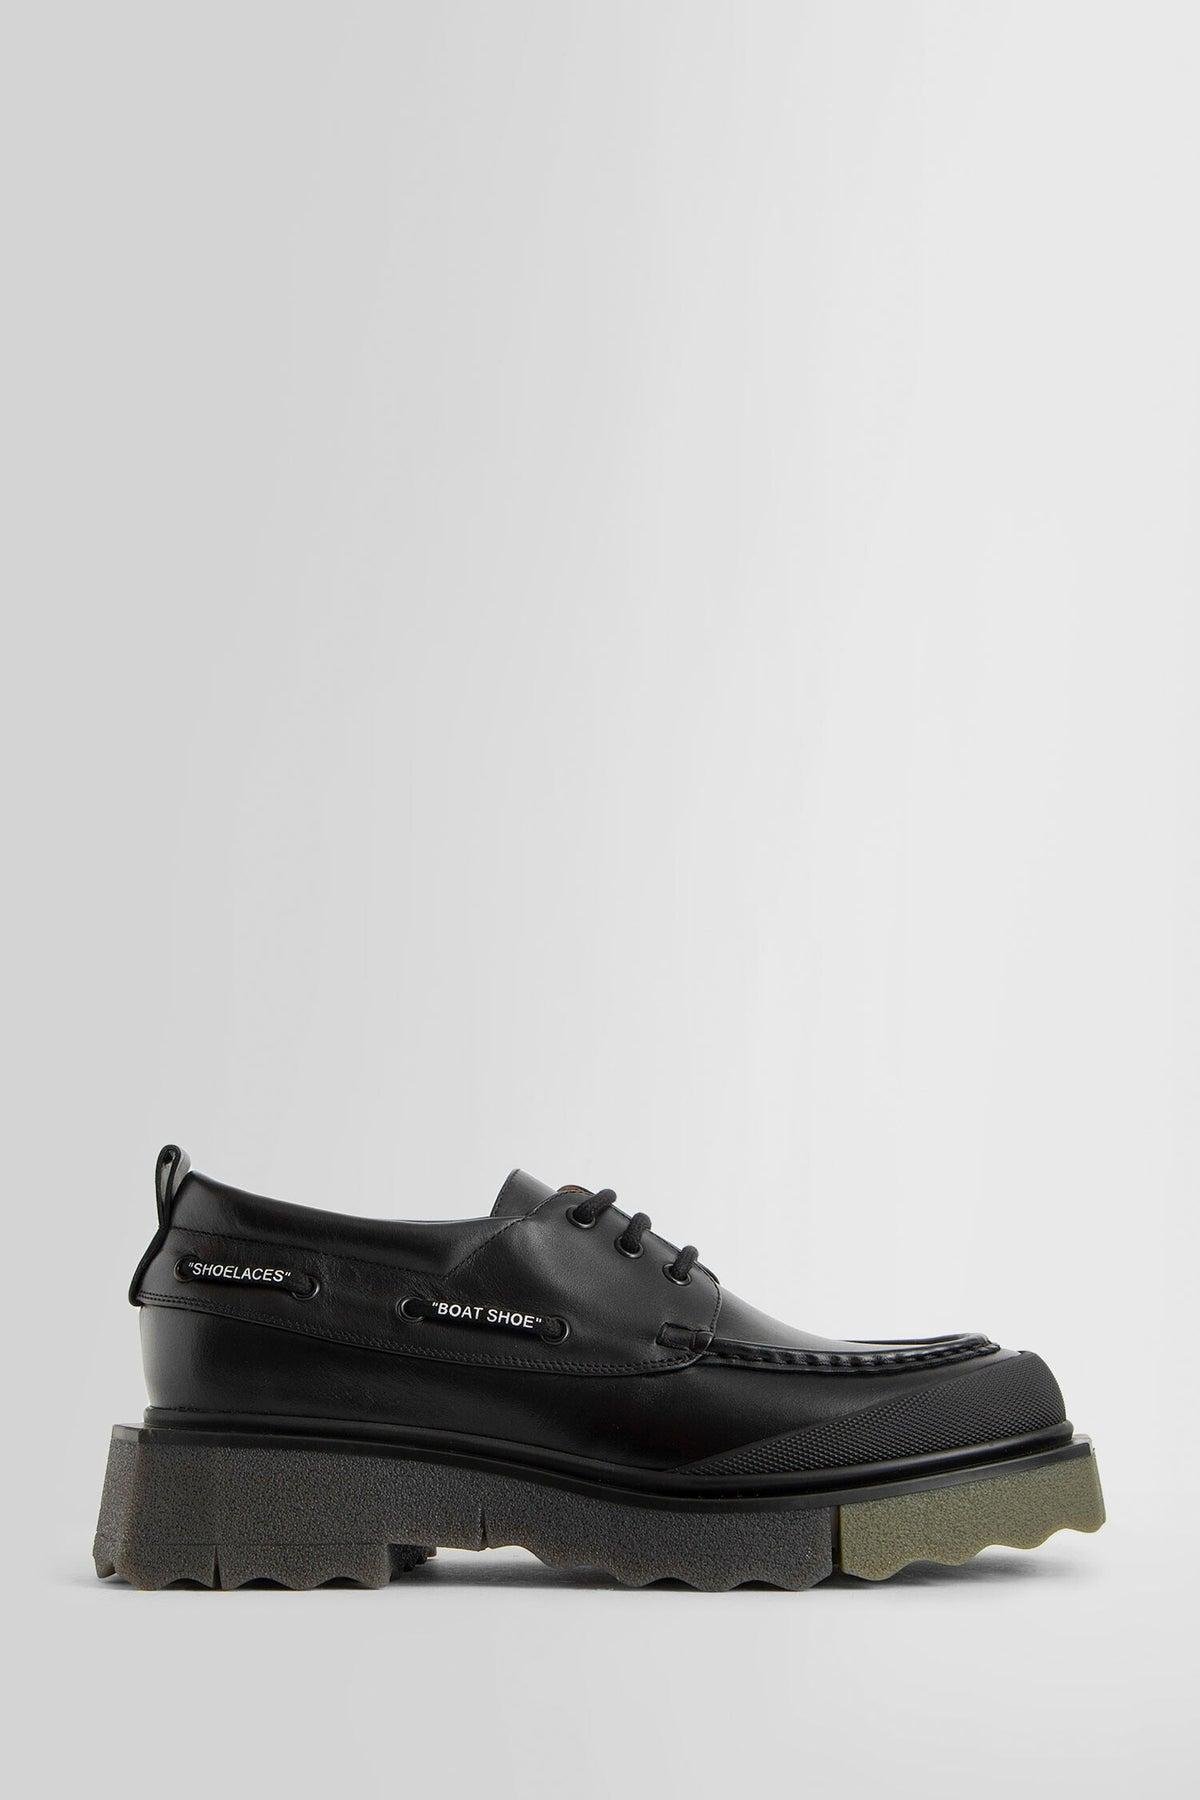 OFF-WHITE MAN BLACK LACE-UPS by OFF-WHITE